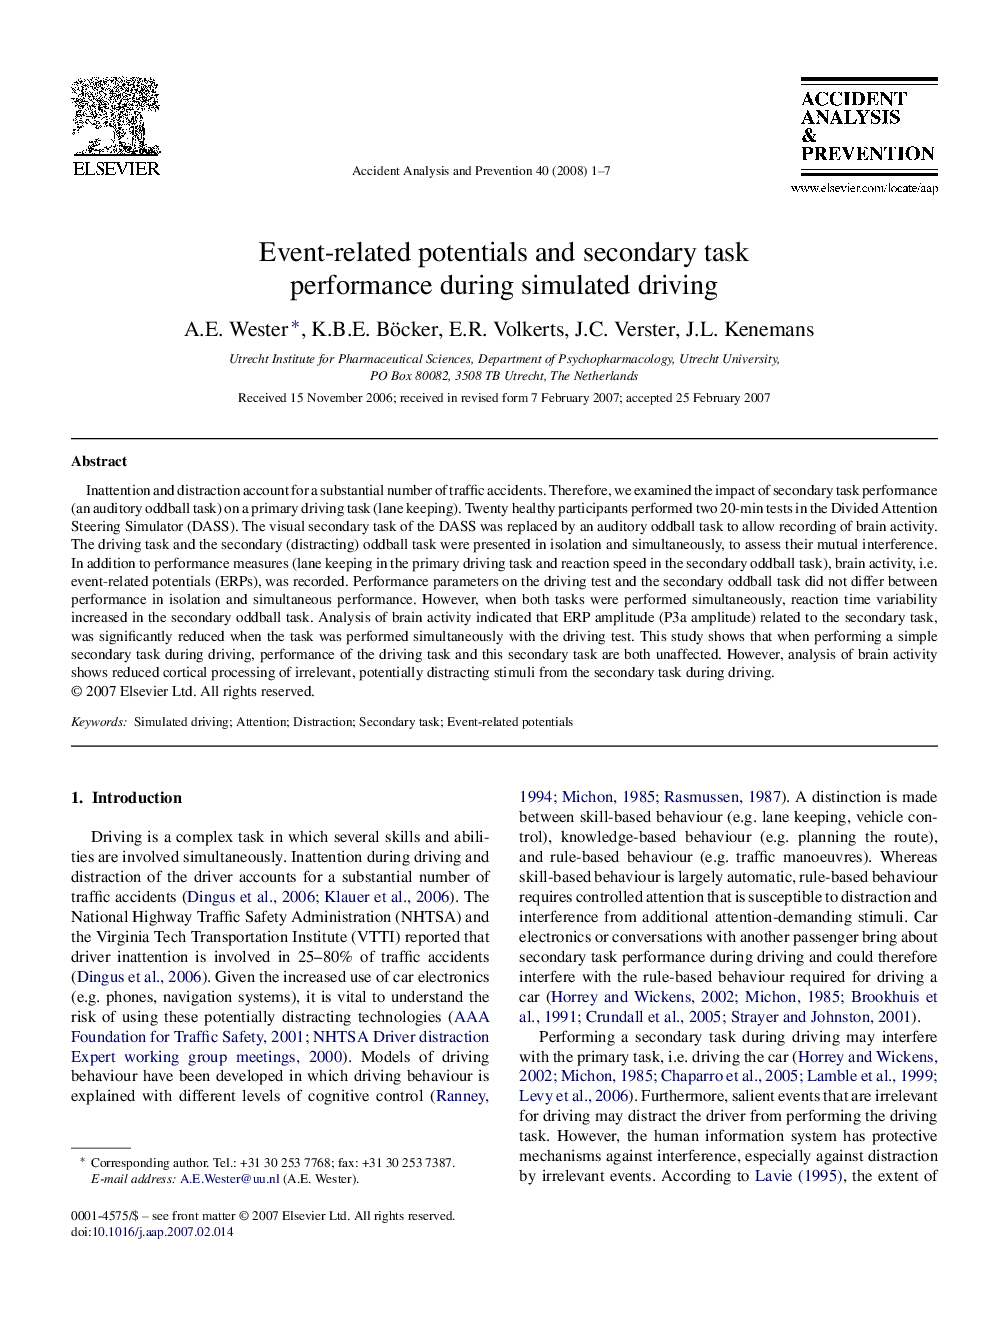 Event-related potentials and secondary task performance during simulated driving